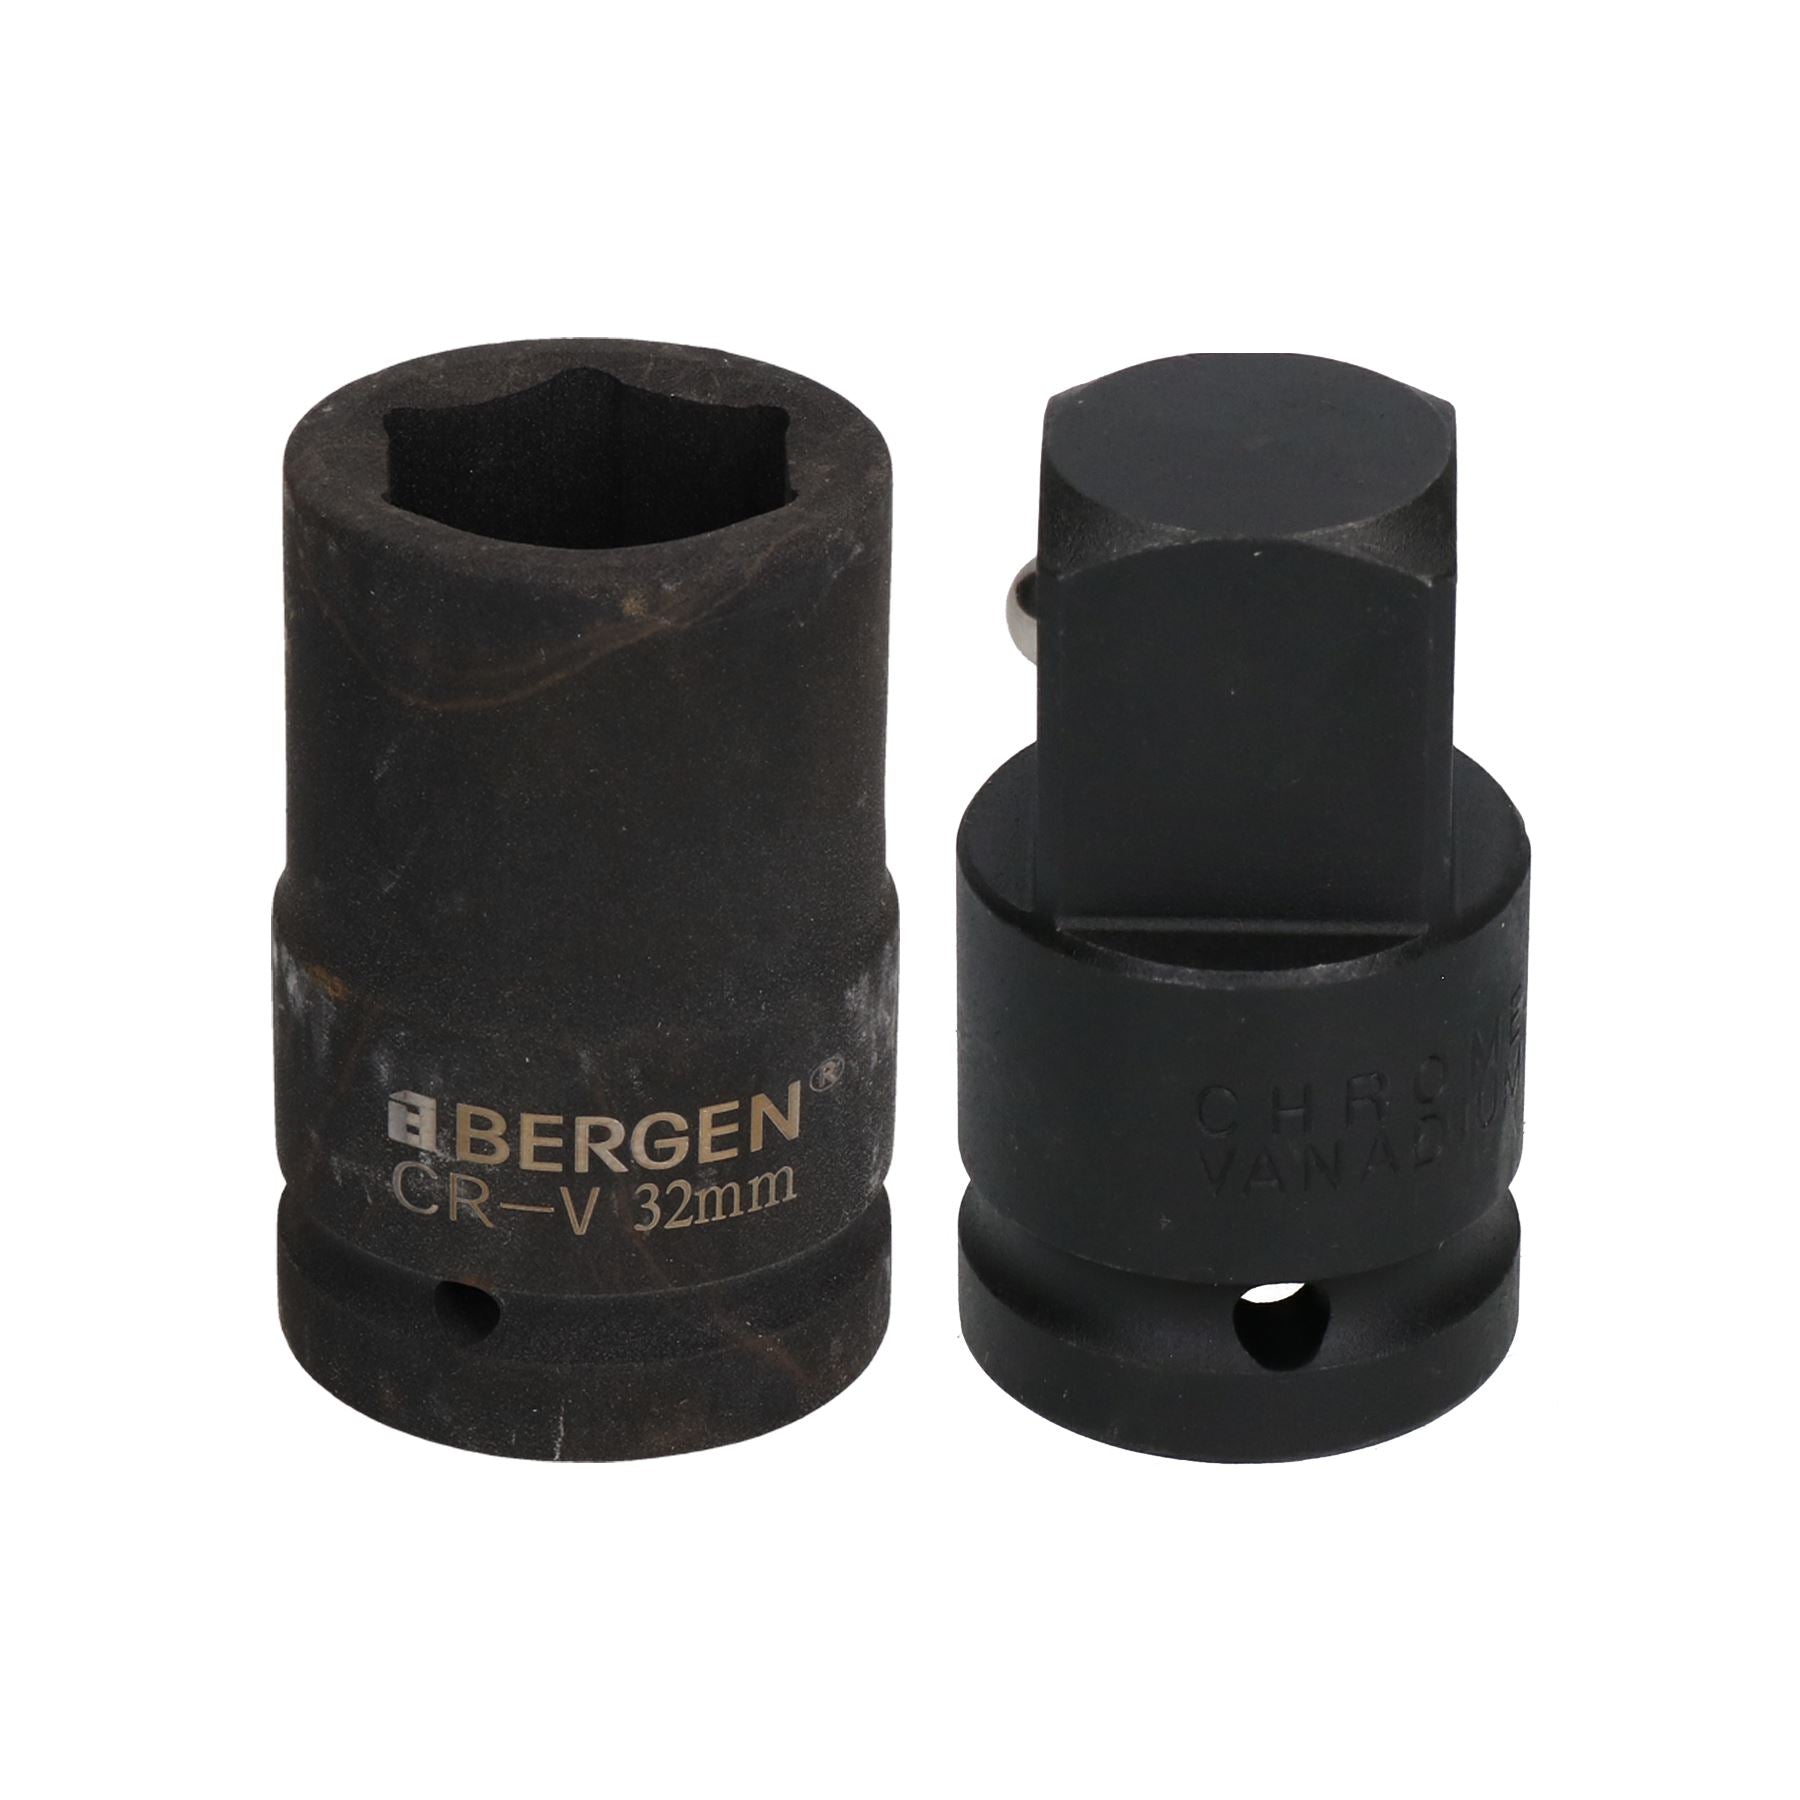 32mm Metric 3/4" or 1" Drive Deep Impact Socket 6 Sided With Step Up Adapter